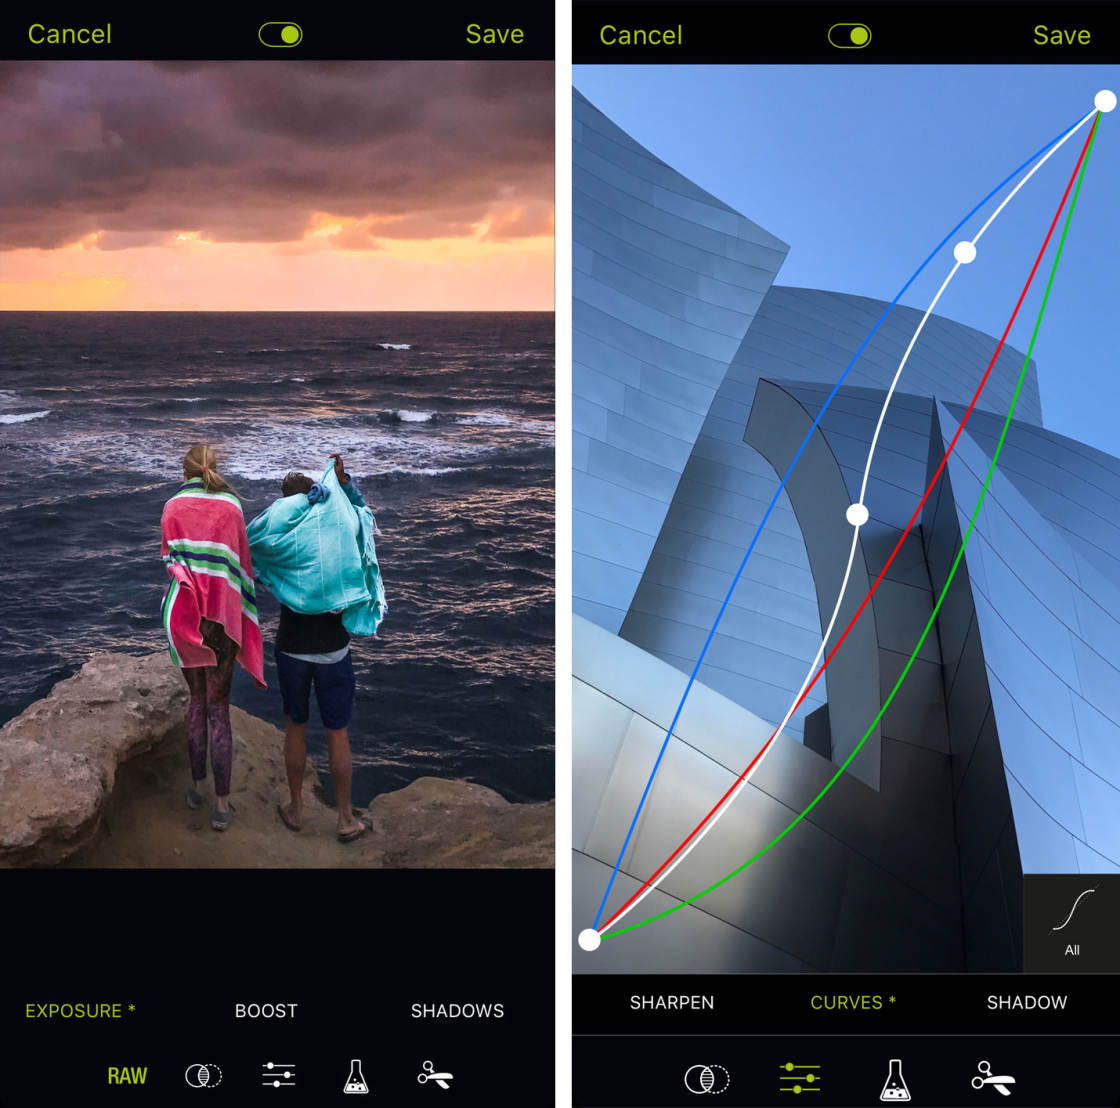 Best Camera App For iPhone